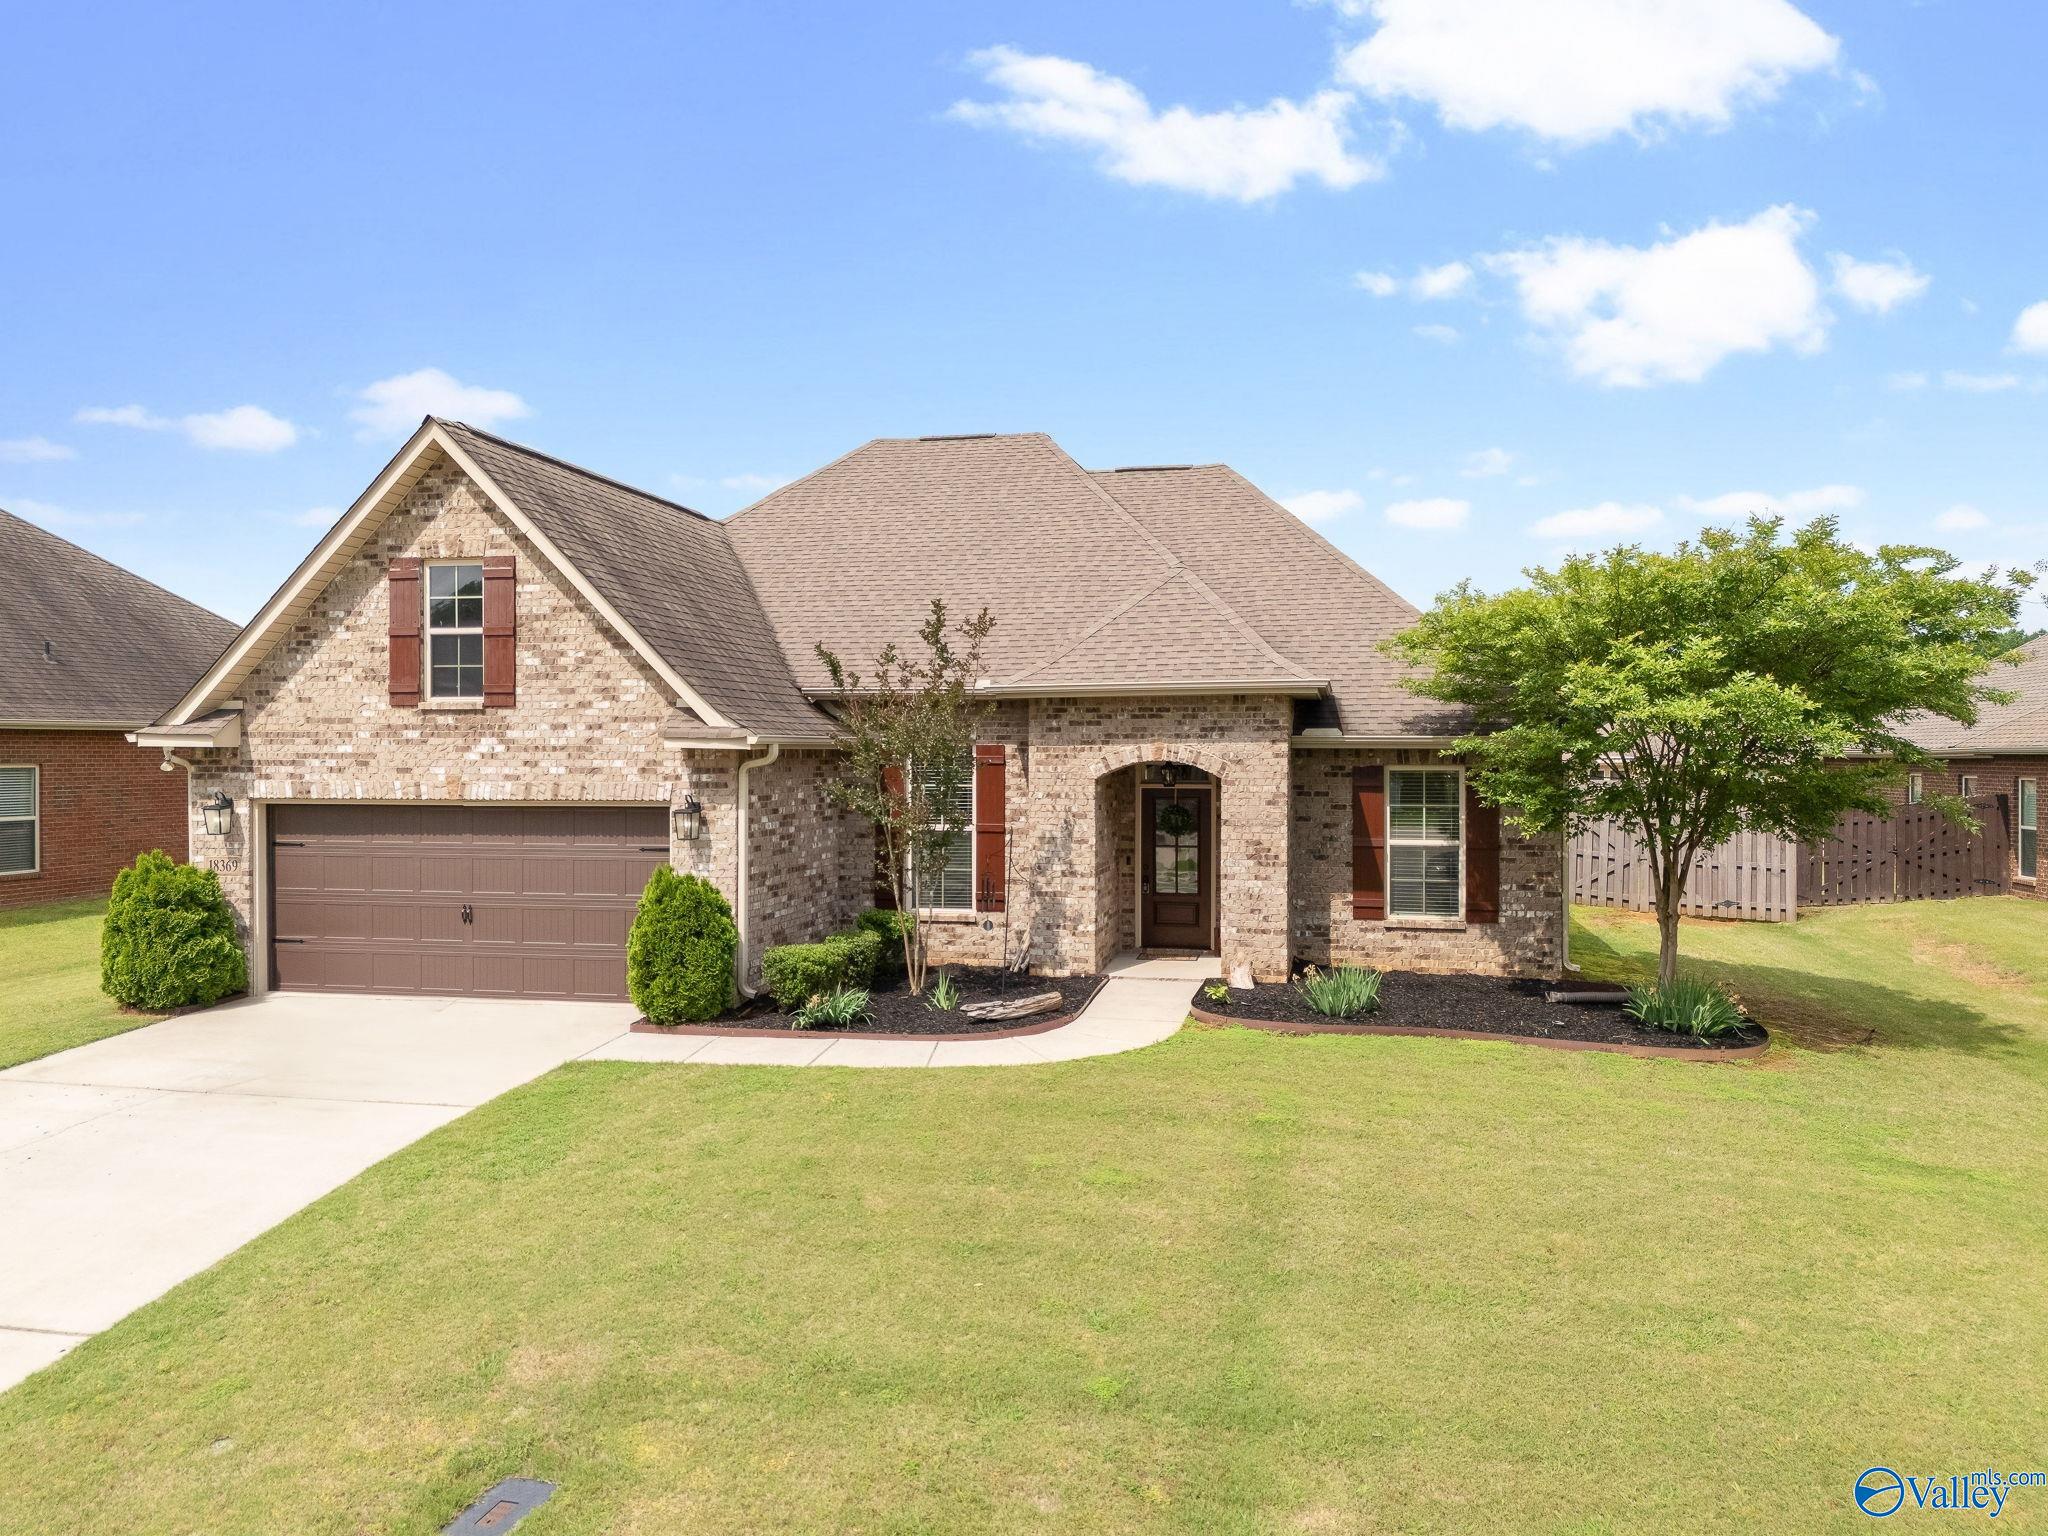 Property: 18369 Red Tail Street,Athens, AL